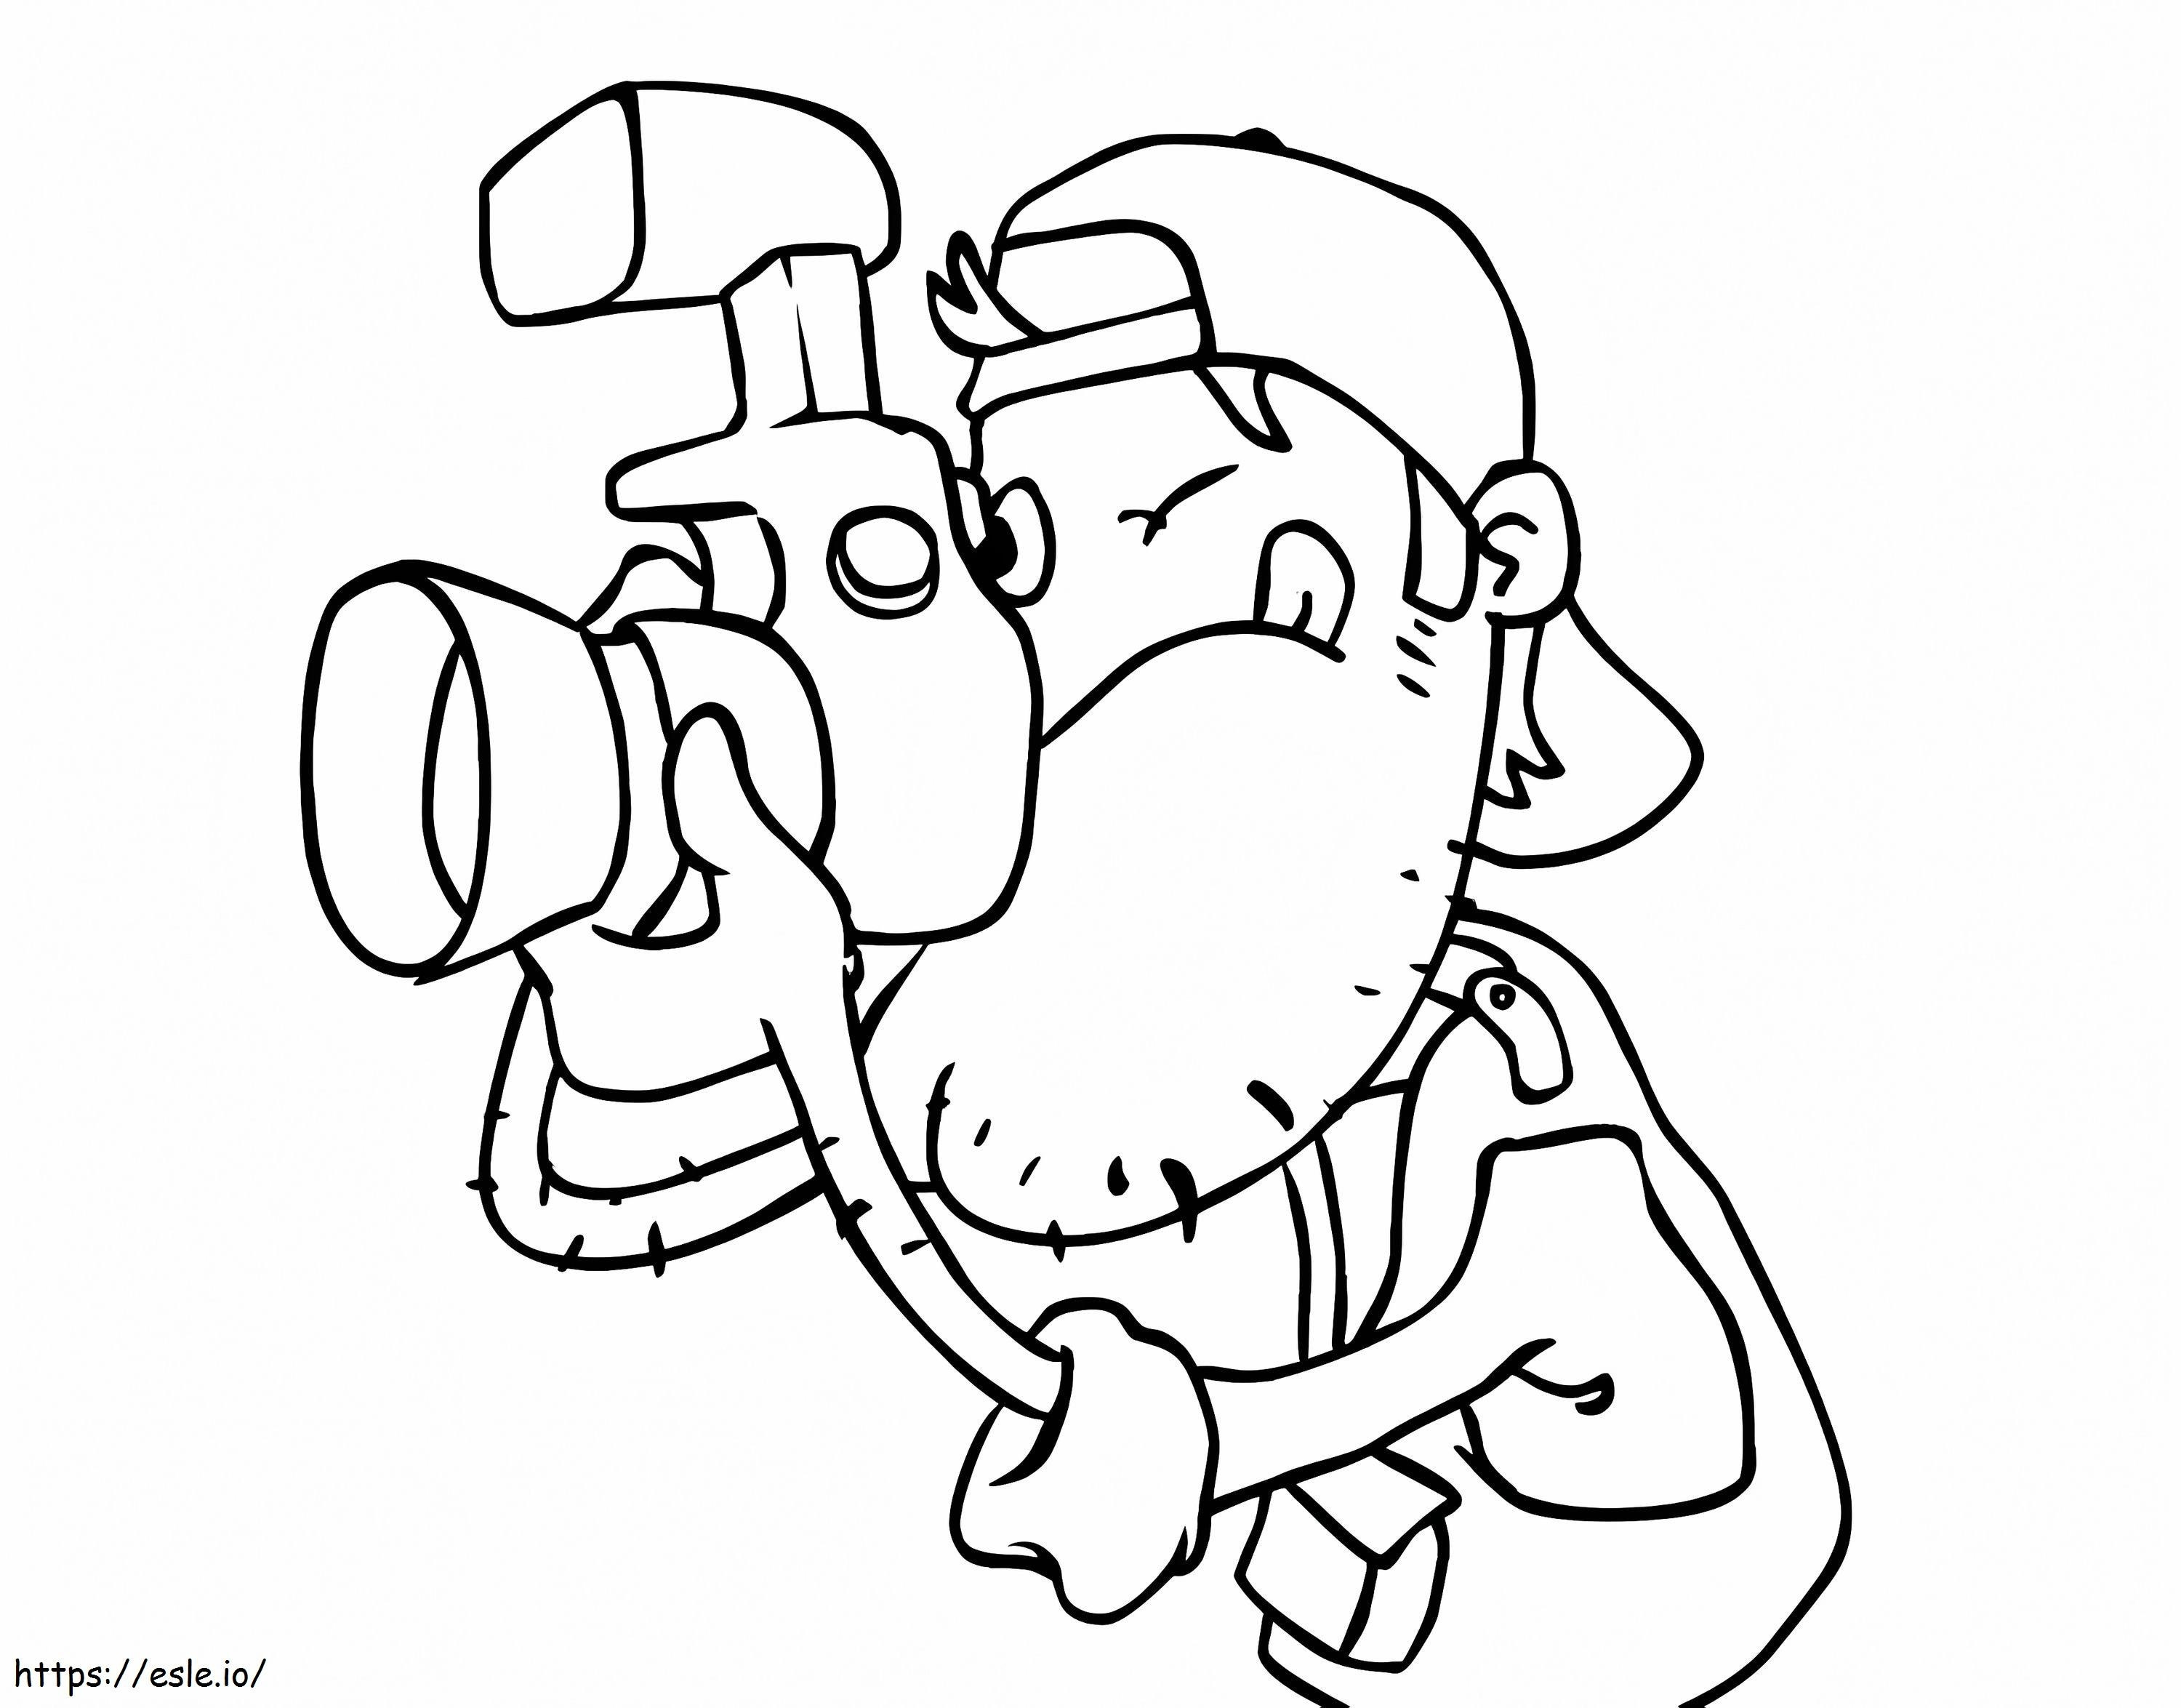 Photographer 8 coloring page